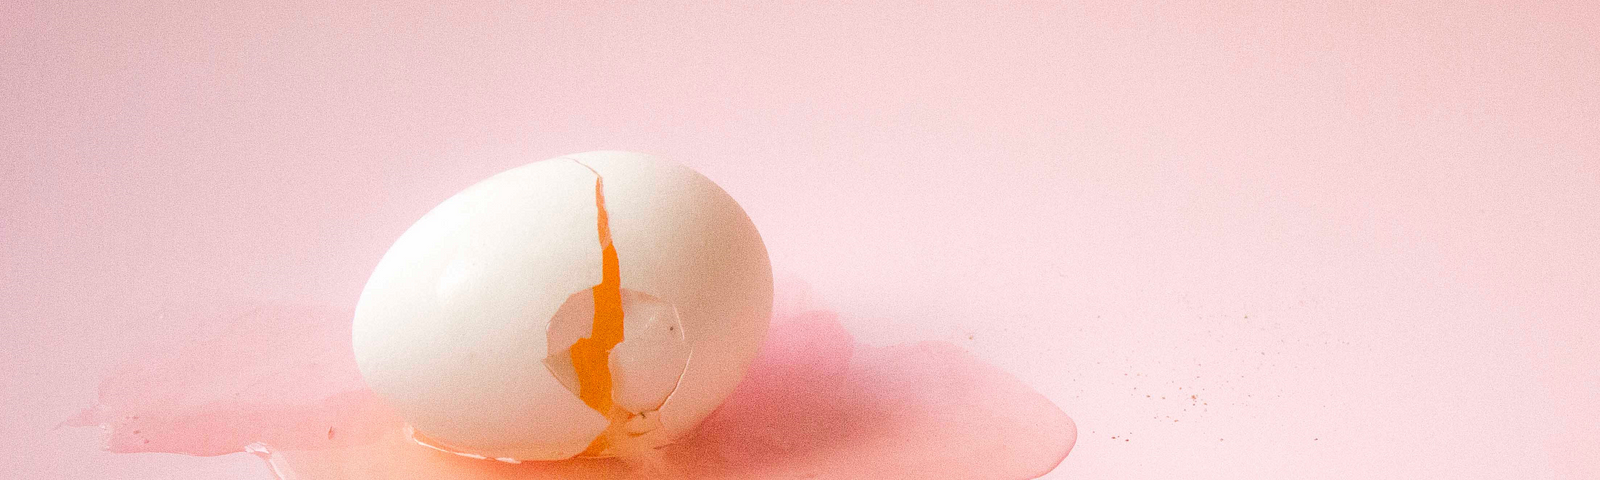 White cracked egg with pink background